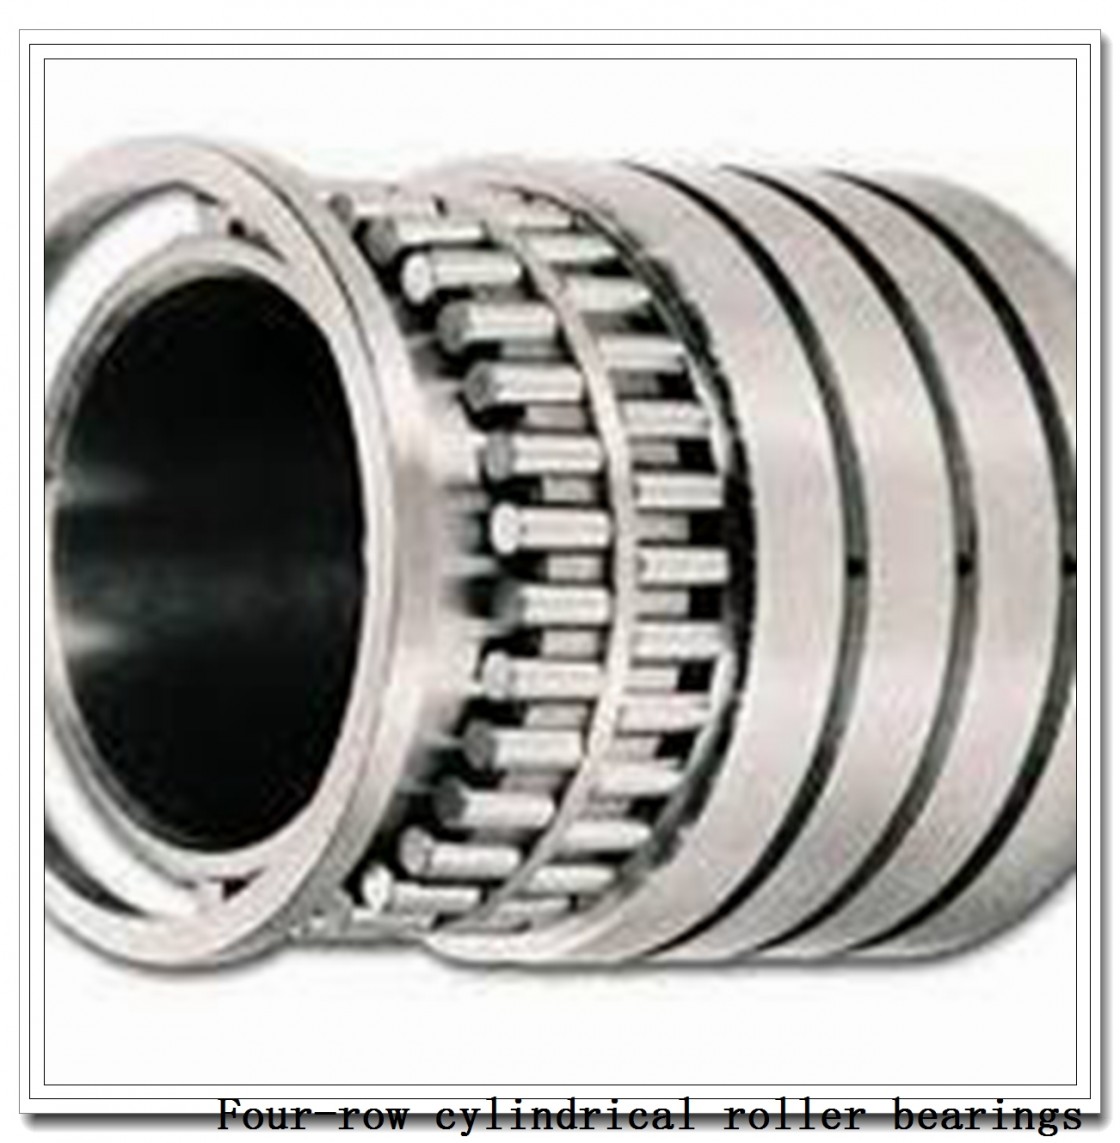 500RX2345A RX-4 Four-Row Cylindrical Roller Bearings